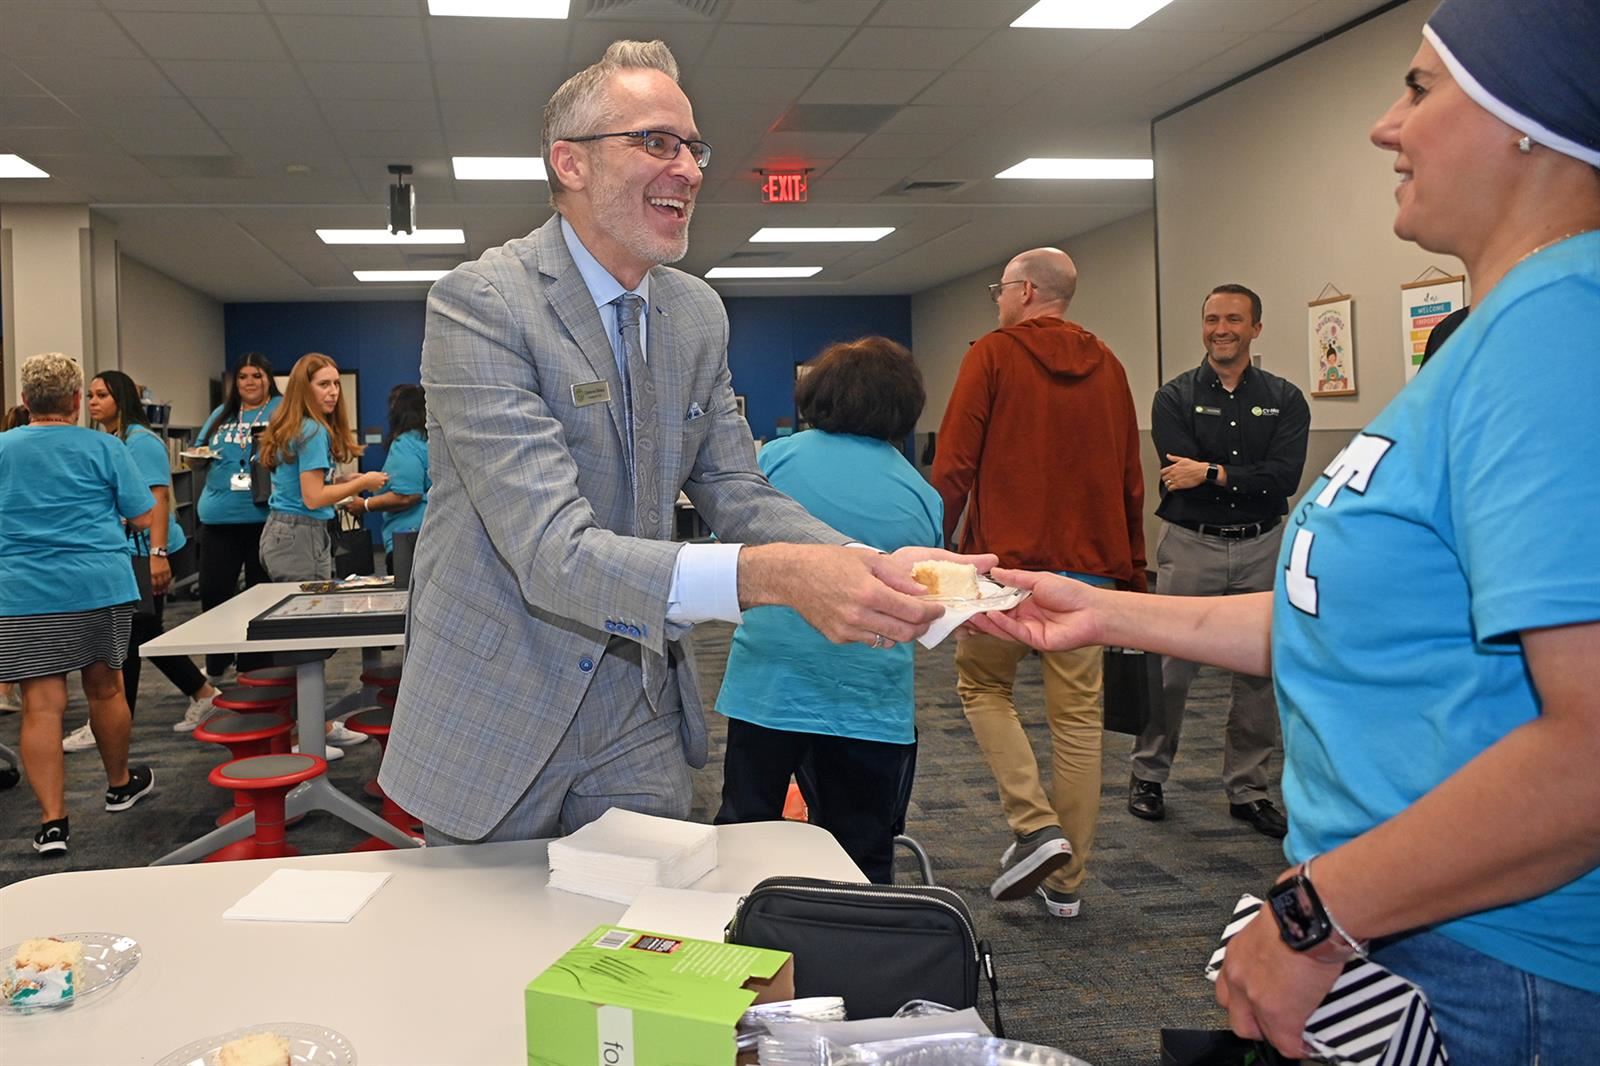 Cameron Dickey, Cy-Fair Federal Credit Union president and CEO, serves cake to Fiest Elementary School staff.